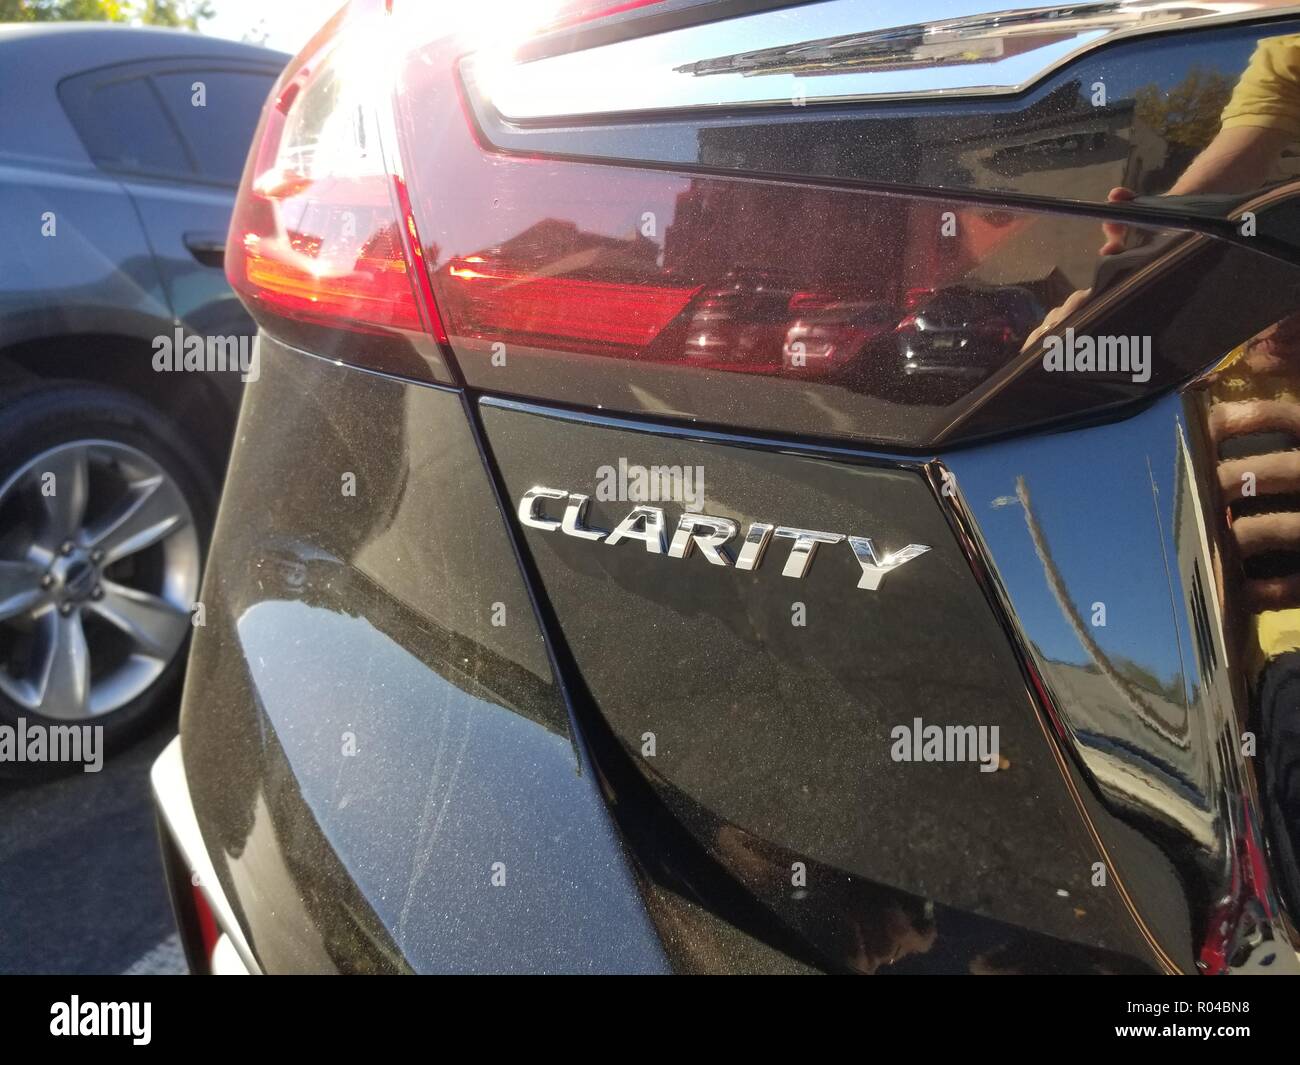 Close-up rear view of the parked Honda Clarity automobile at the Walnut Creek auto lot in Walnut Creek, California, October 30, 2018 Stock Photo